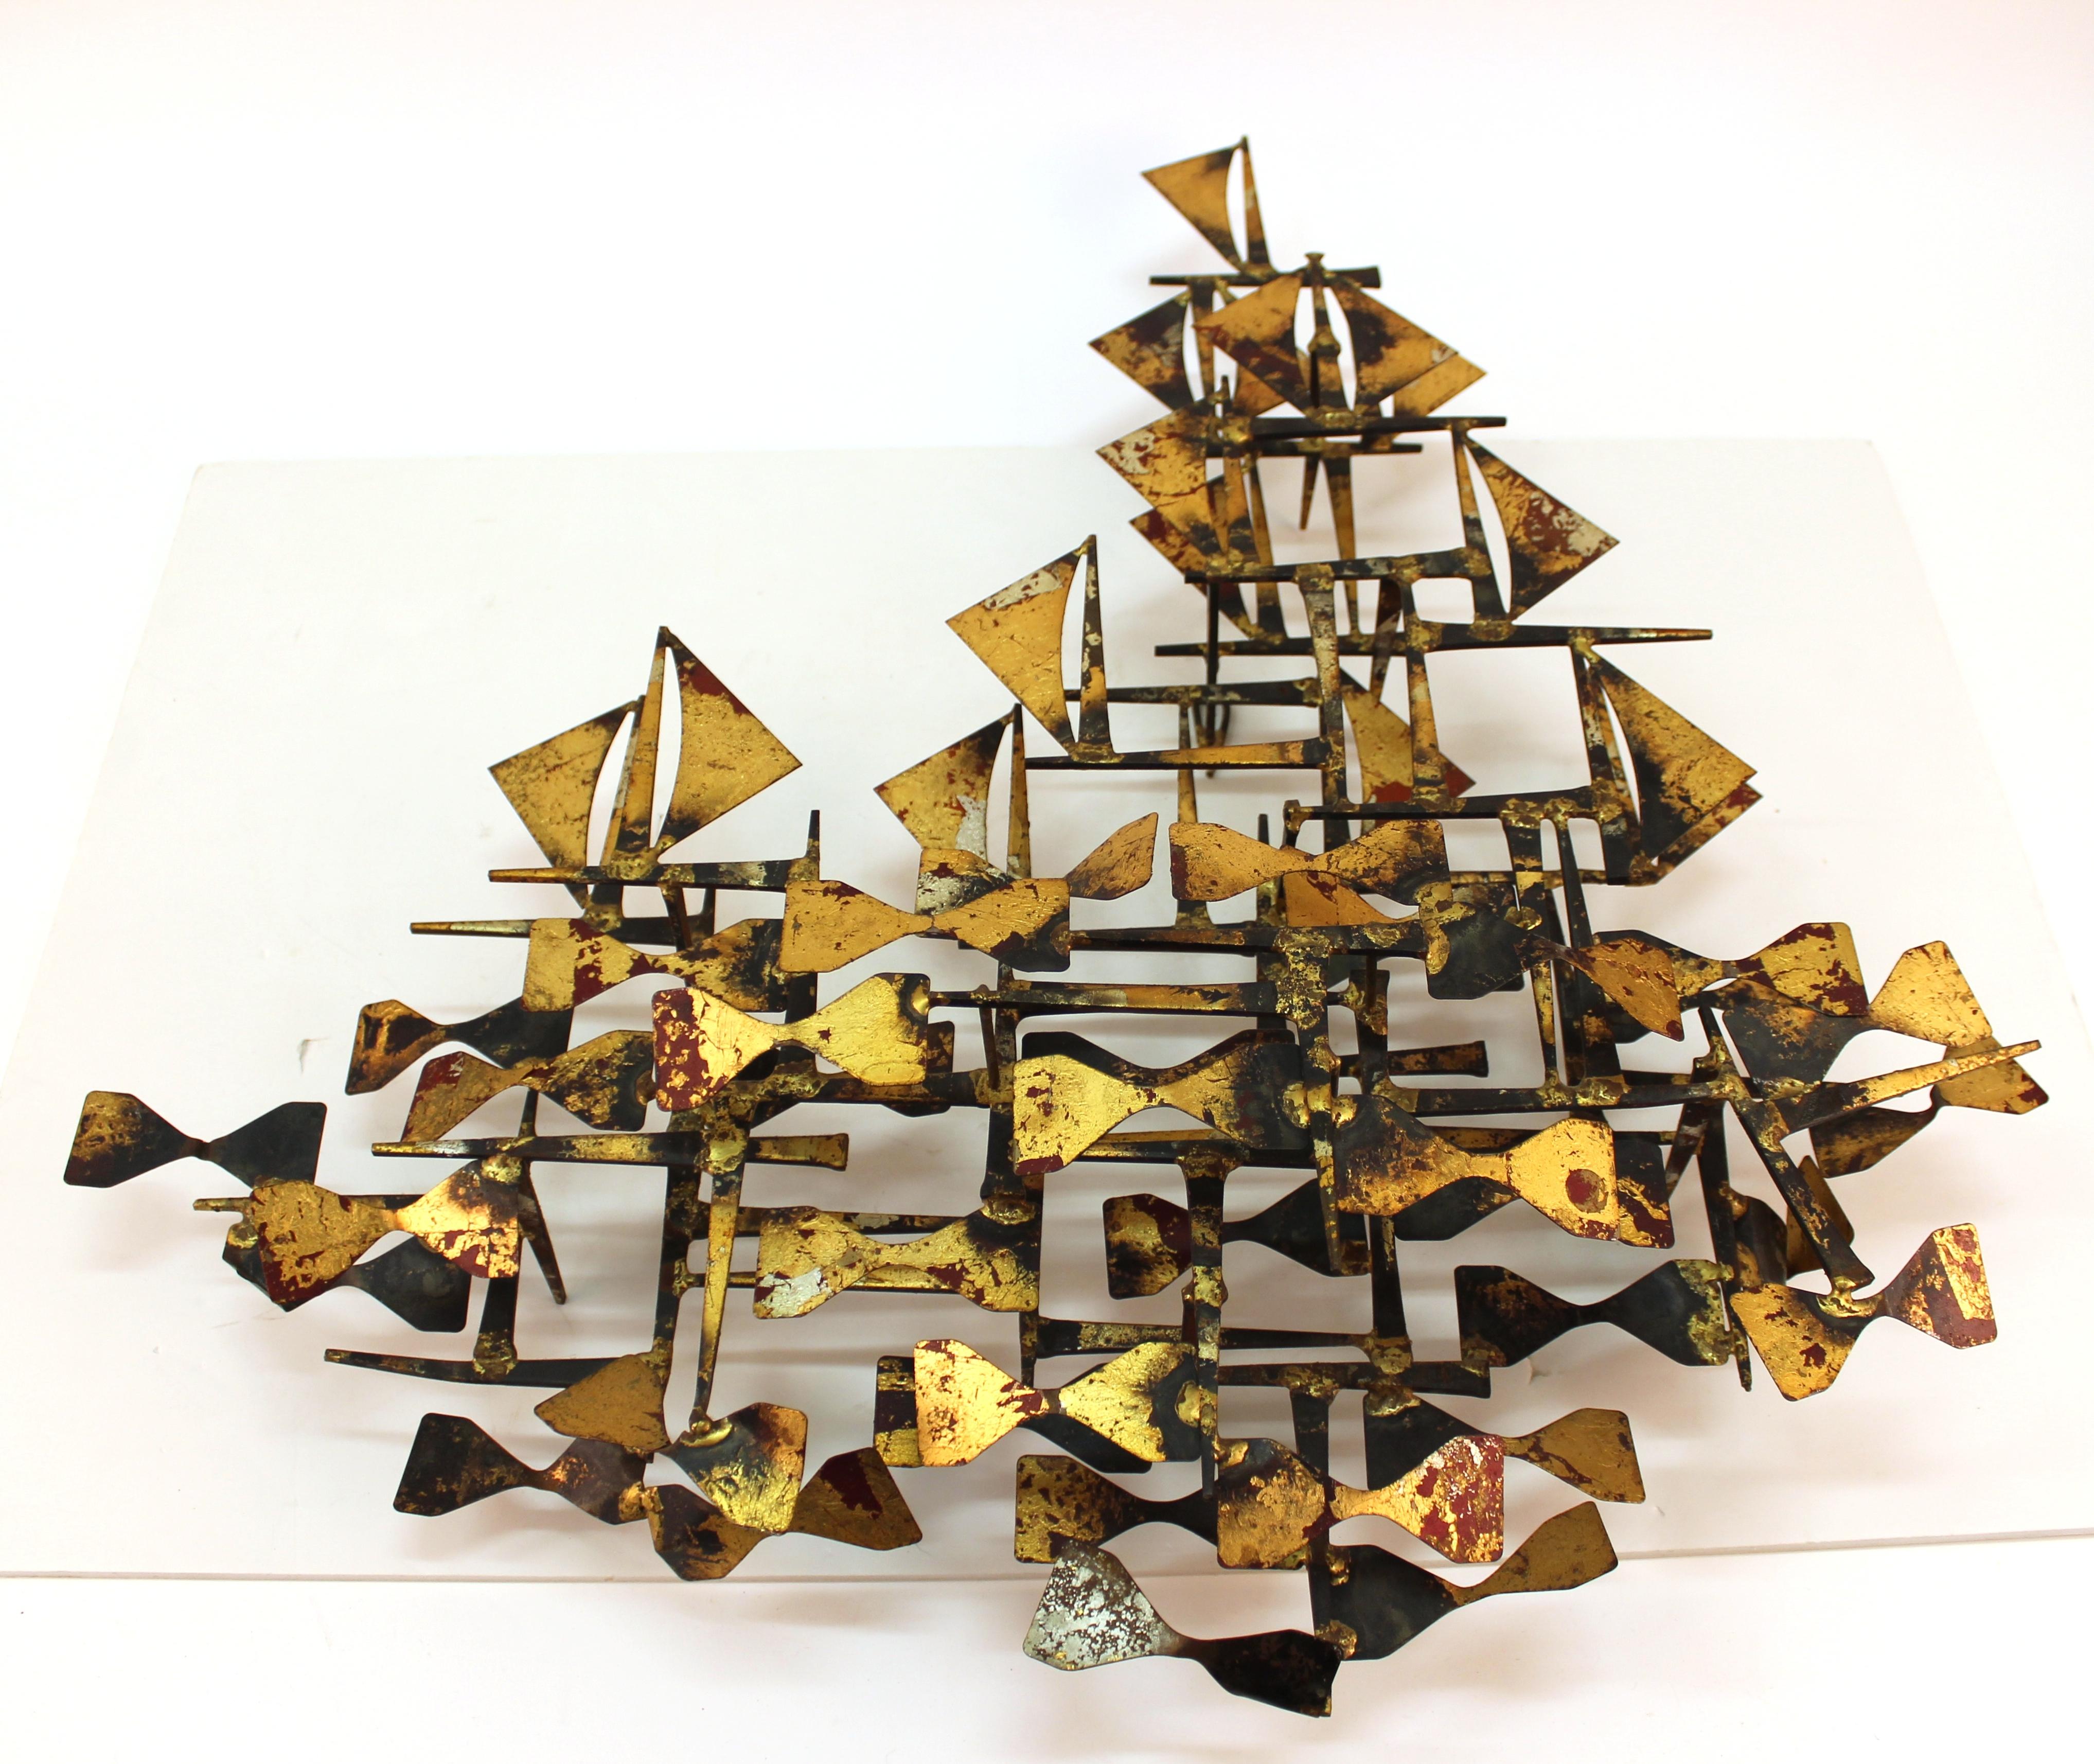 Brutalist abstract wall sculpture in welded metal with a gilt patina, created by American sculptor and designer Silas Seandel (b. 1937). The piece was made in the United States during the 1970s-1980s and is in good vintage condition.